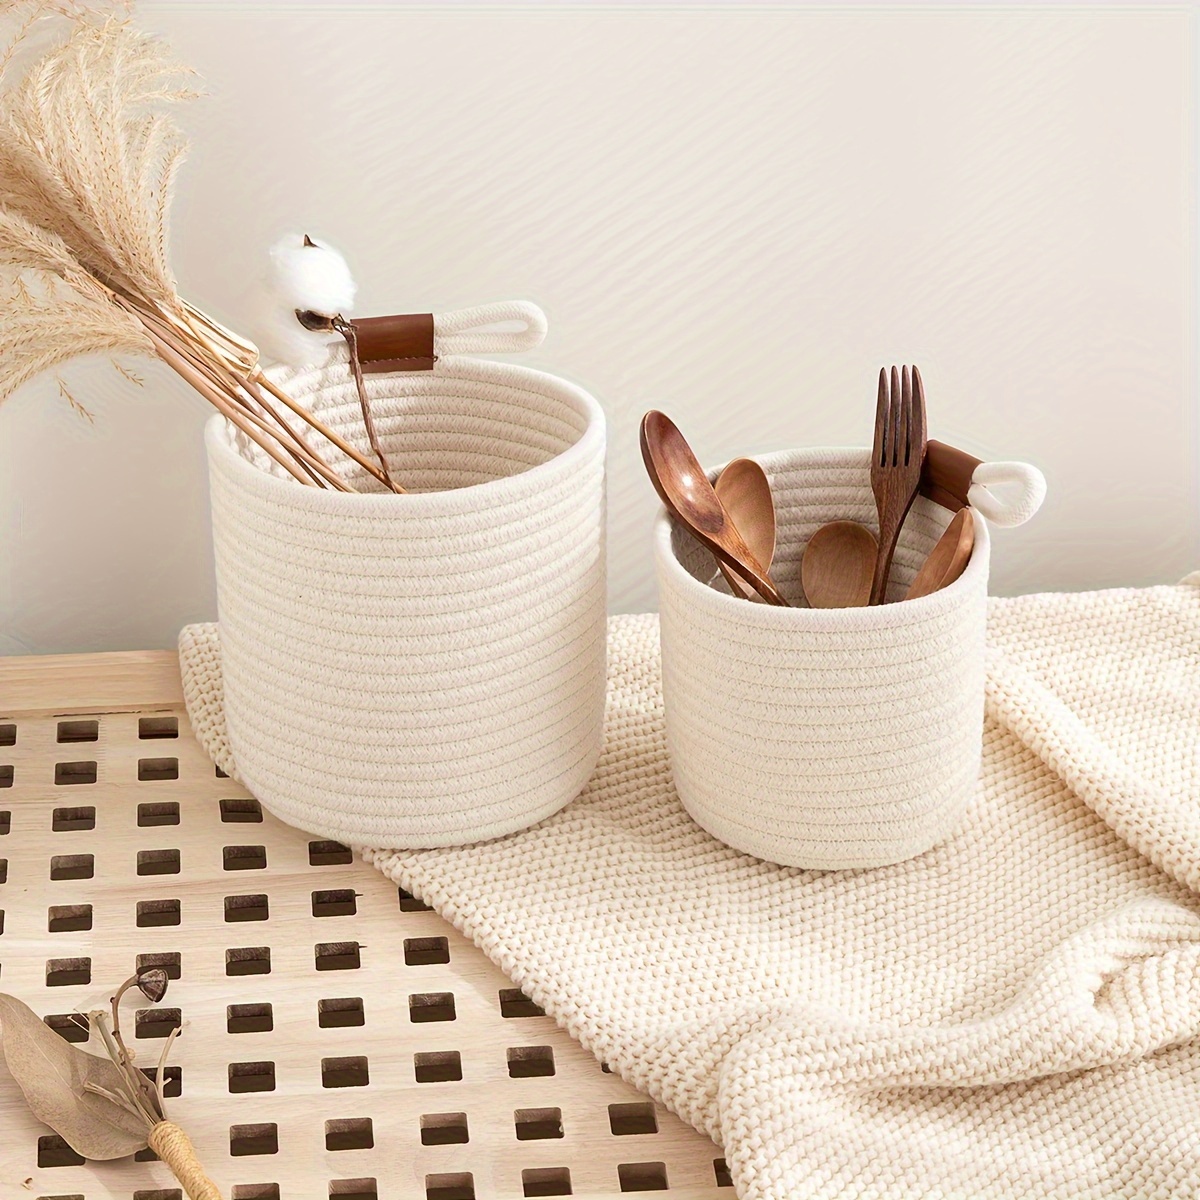 

1pc Round Mini Rope Storage Cotton Woven Basket, Hamper Tray Bucket, Sundries Organizer For Toys, Fruits, Gifts, Home Supplies